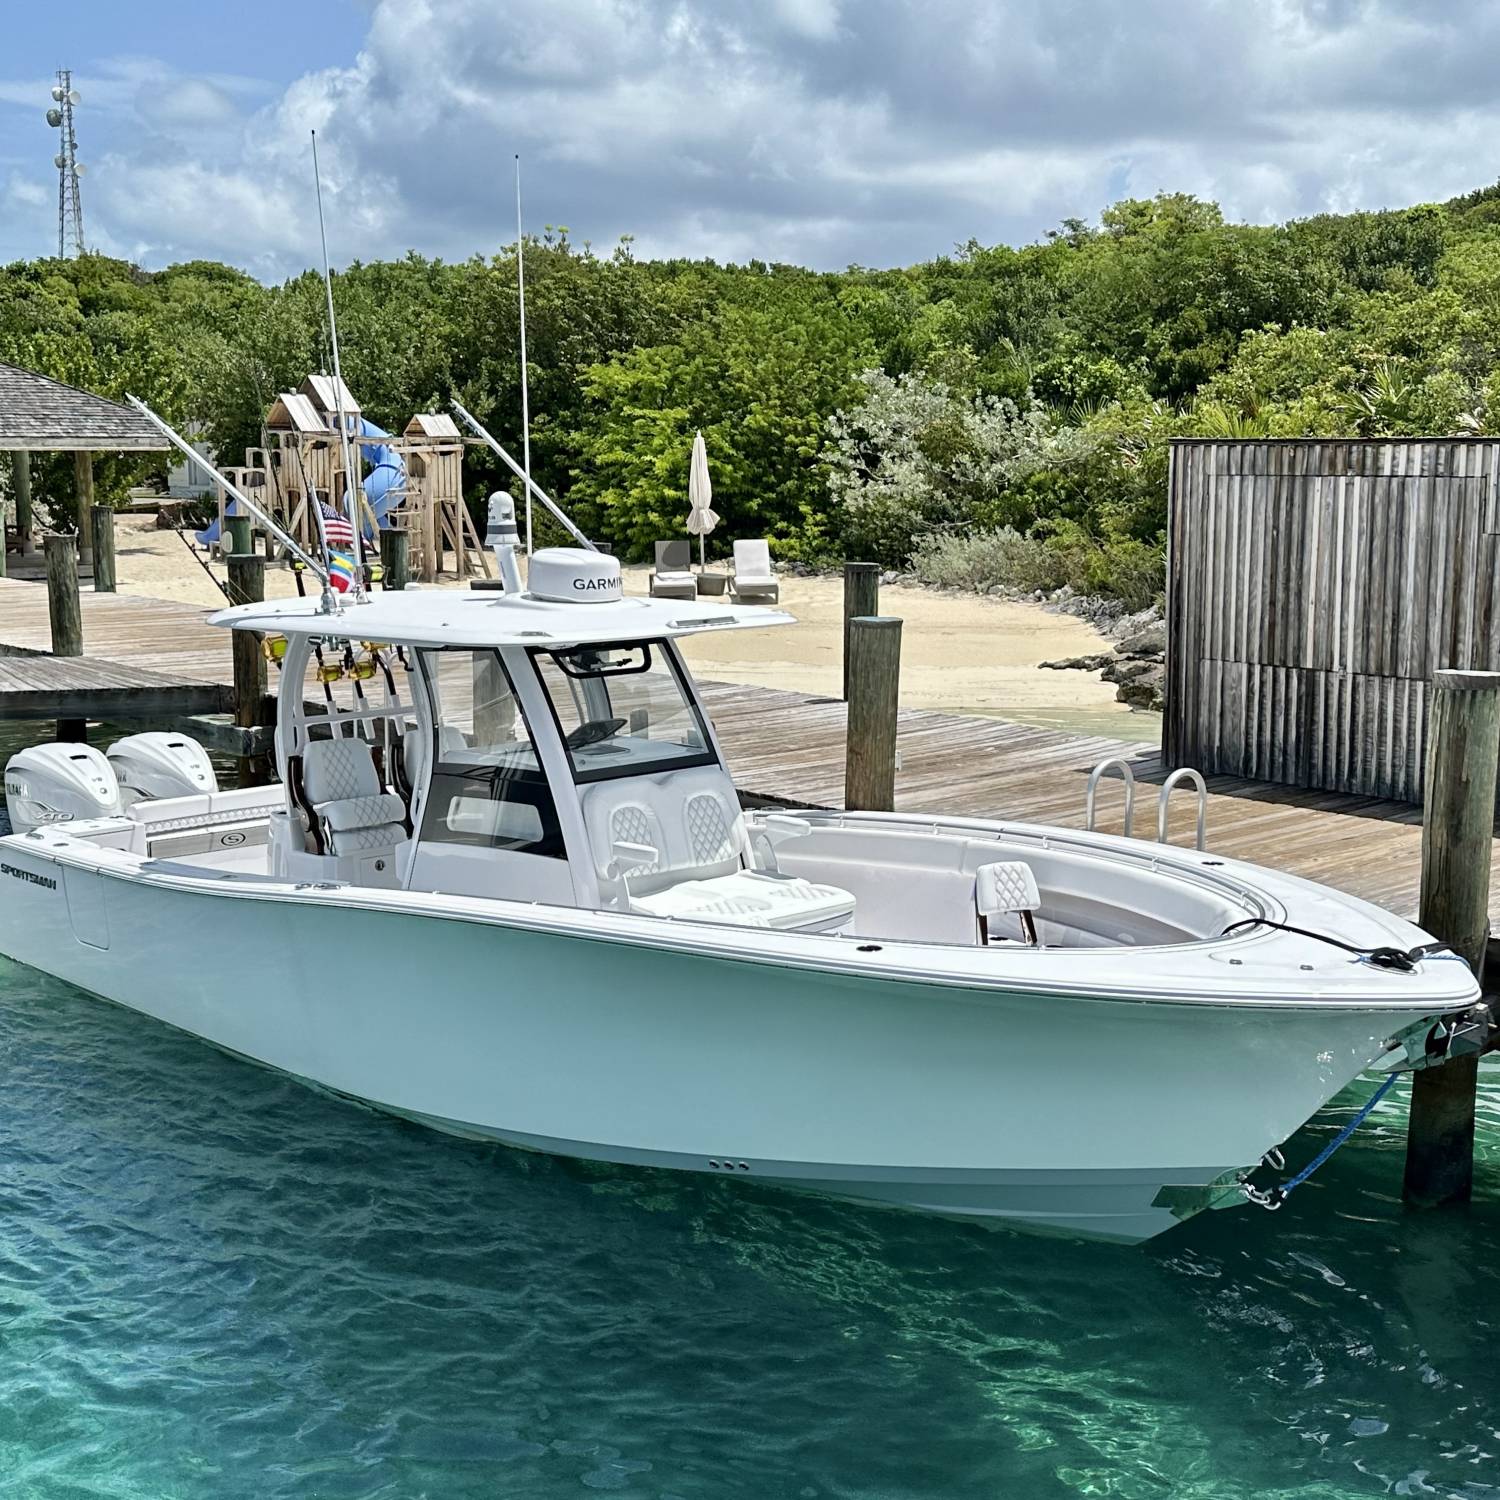 Title: SOUL MATE at Highborne Bahamas - On board their Sportsman Open 322 Center Console - Location: Highborne Marina Exumas. Participating in the Photo Contest #SportsmanJuly2023